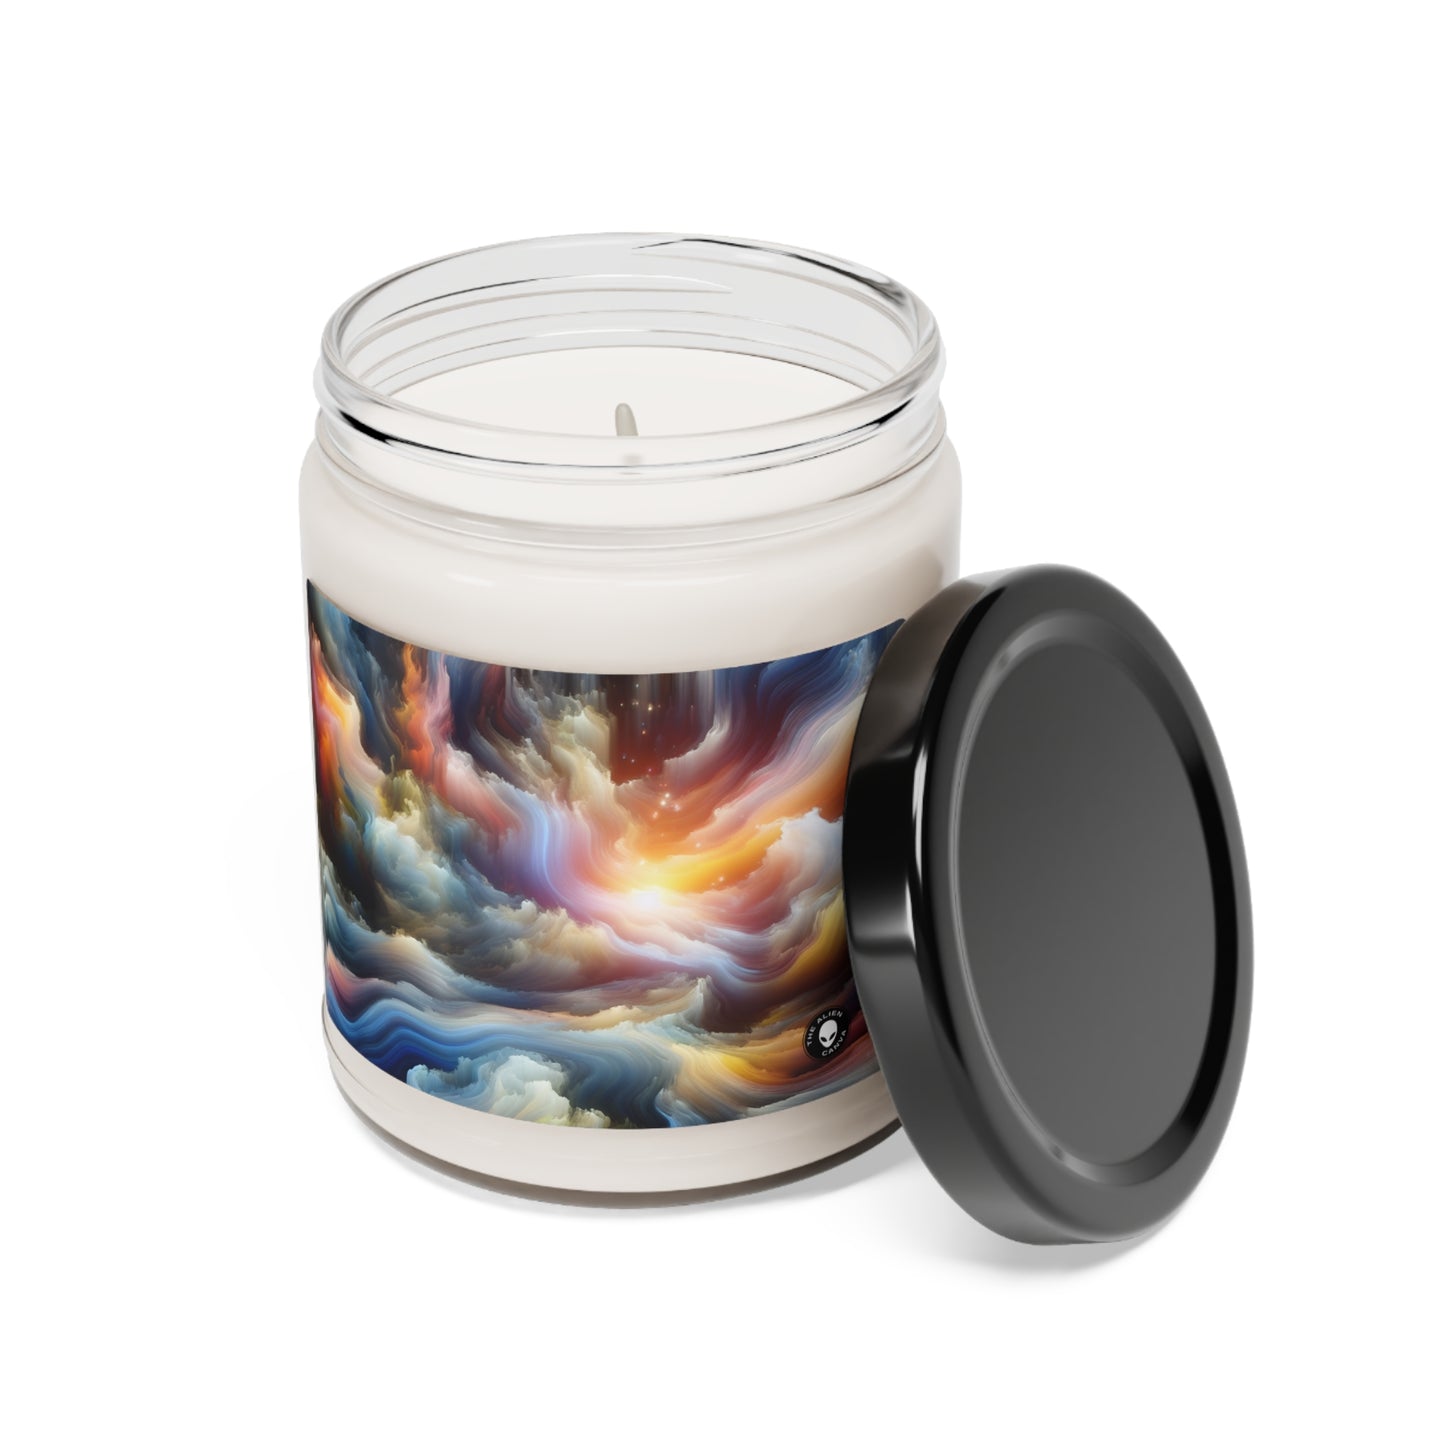 "Ephemeral Escapes: A Timeless Journey Through Changing Landscapes" - The Alien Scented Soy Candle 9oz Video Art